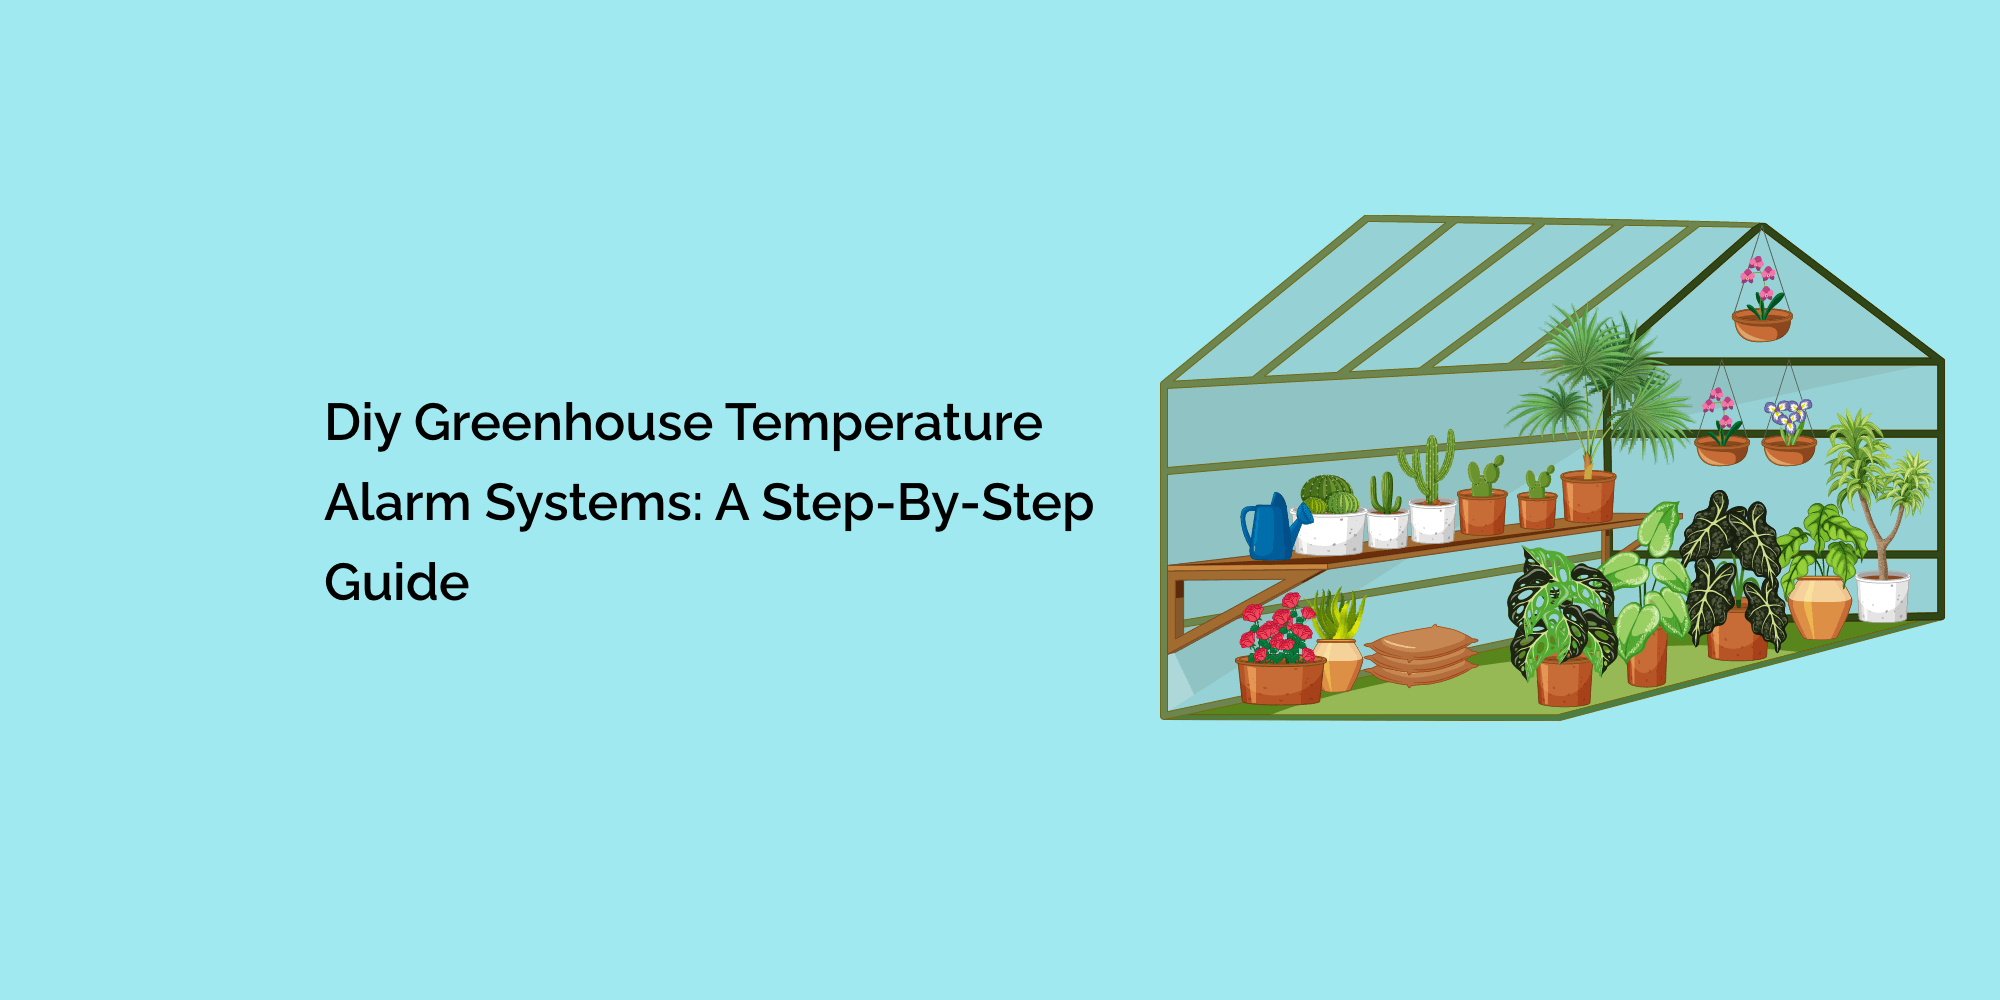 DIY Greenhouse Temperature Alarm Systems: A Step-by-Step Guide